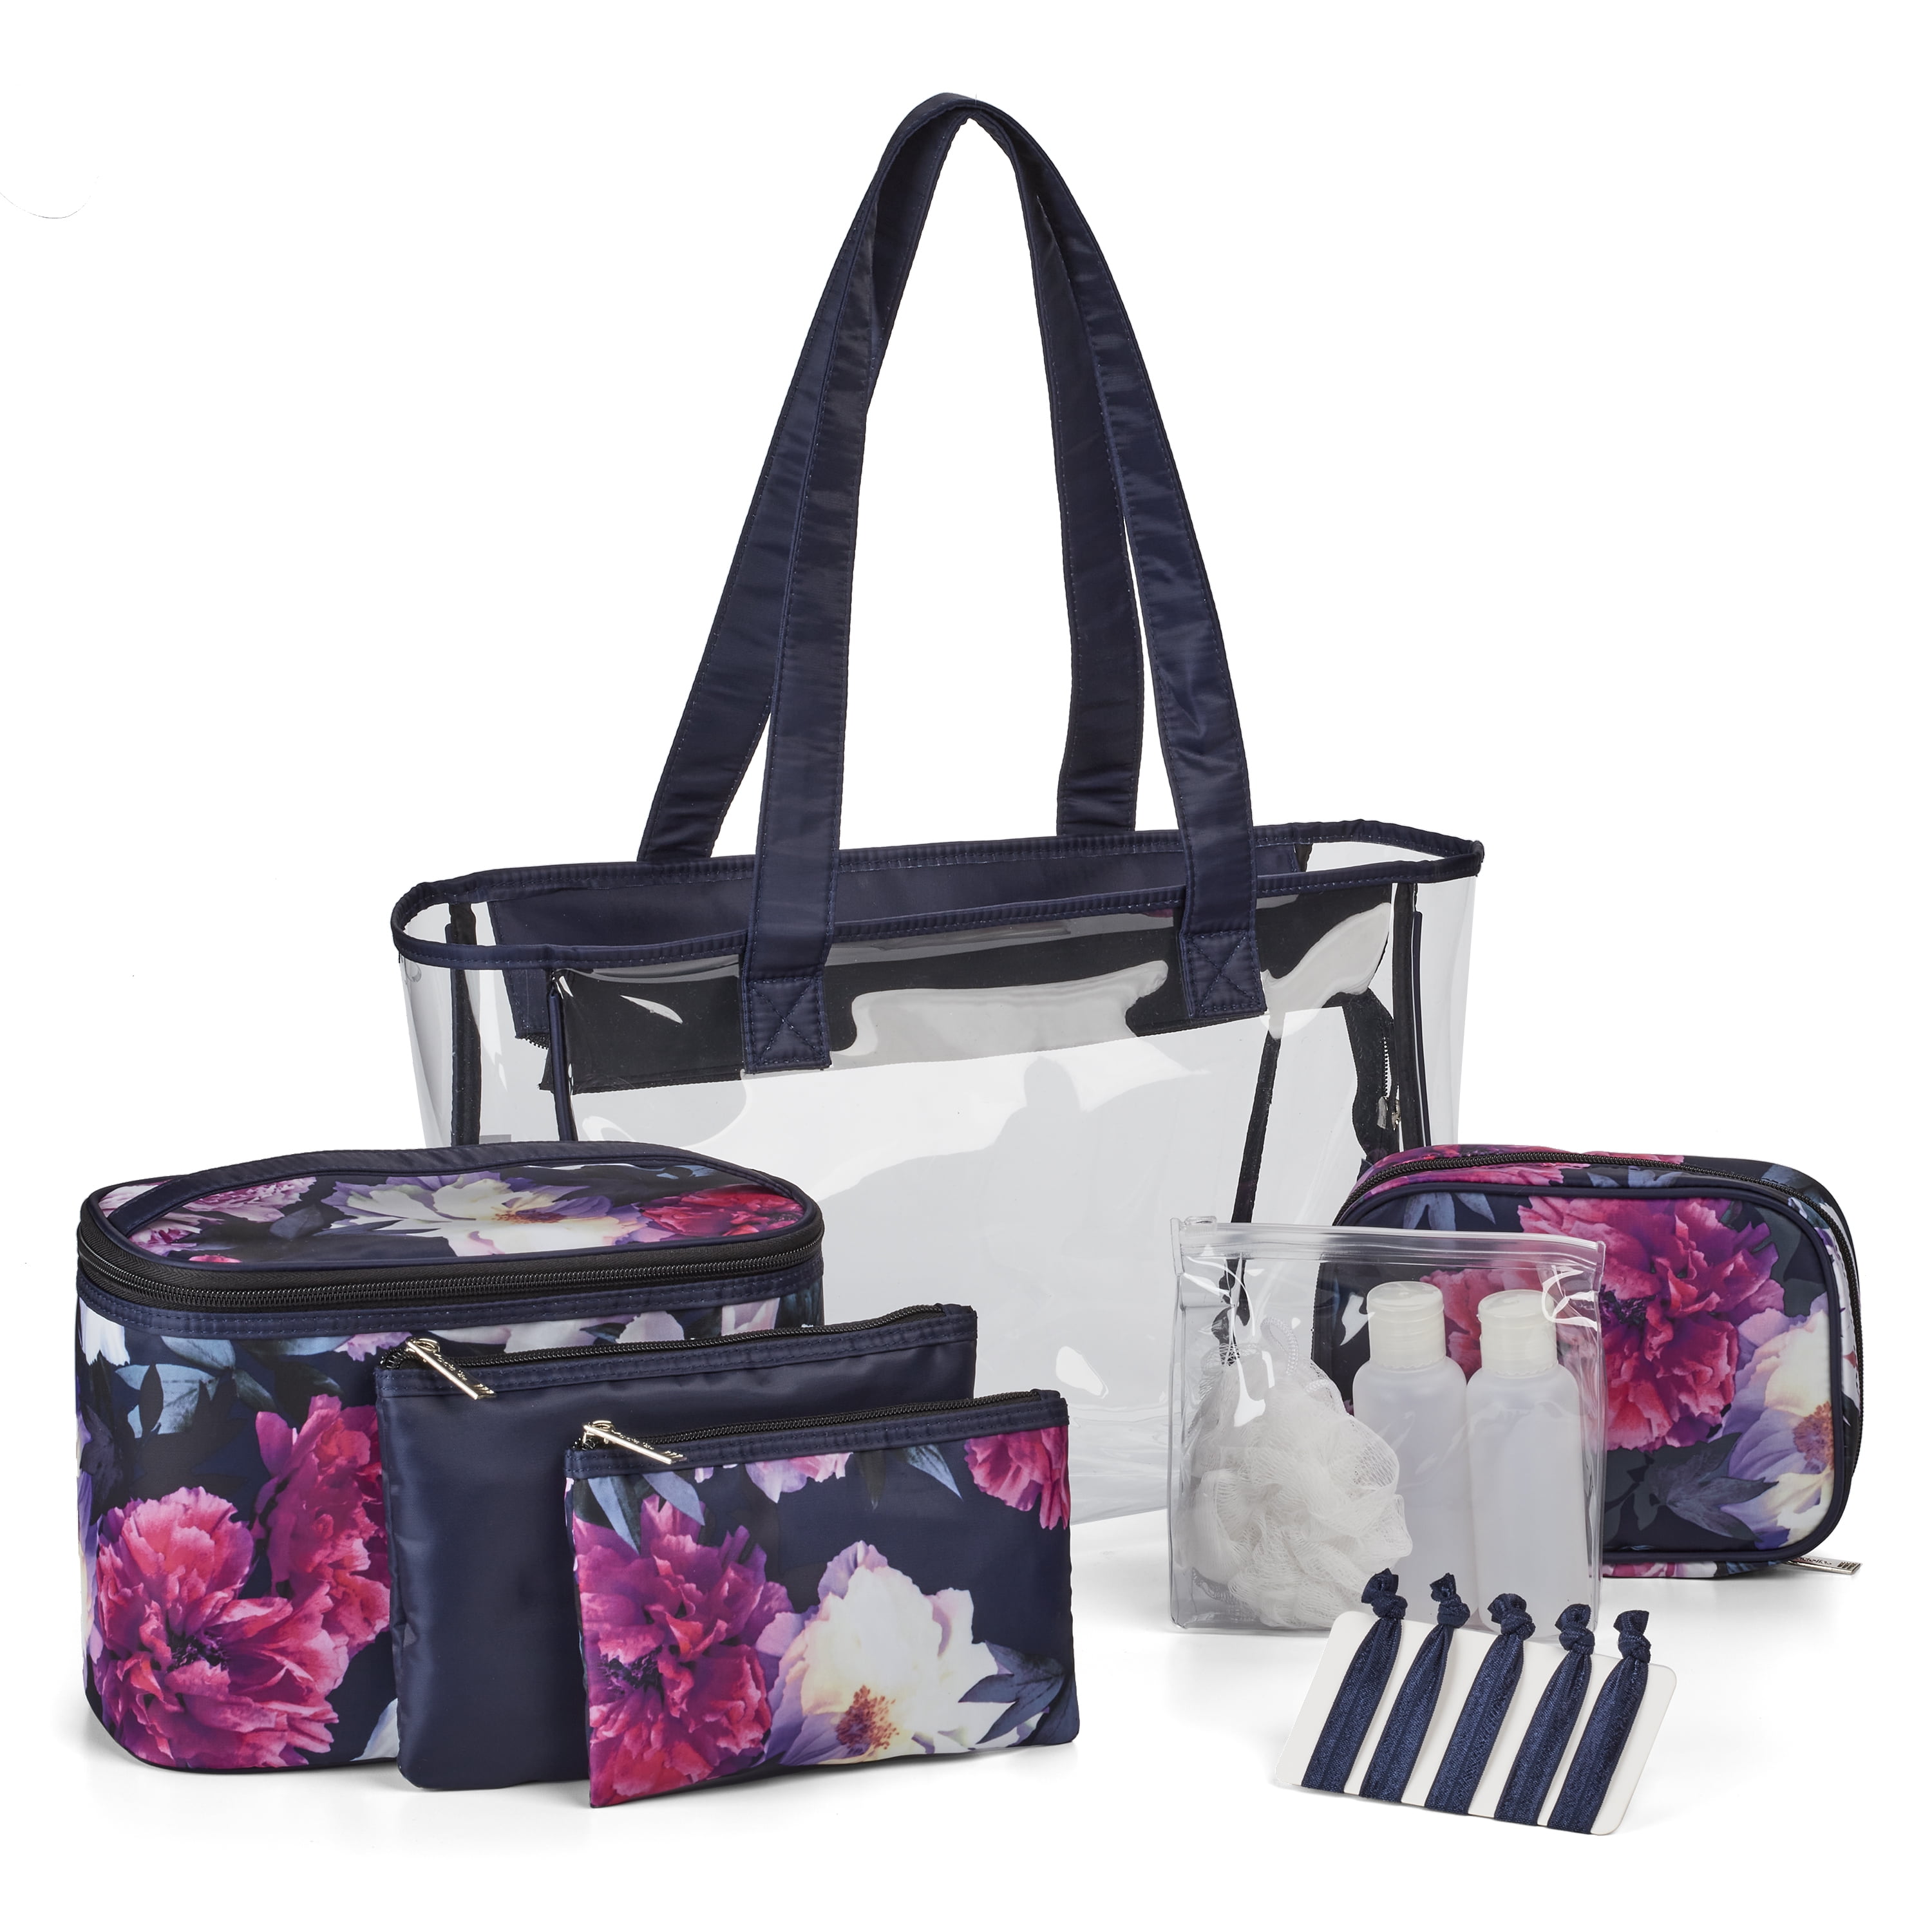 Modella Deluxe 14-Piece PVC Travel Tote with Pink Floral Train Case, Accessory Pouches, Bath & Shower Essentials, Cosmetic Clutch, and Hair Elastics in Midnight Blue and Signature Silver Hardware